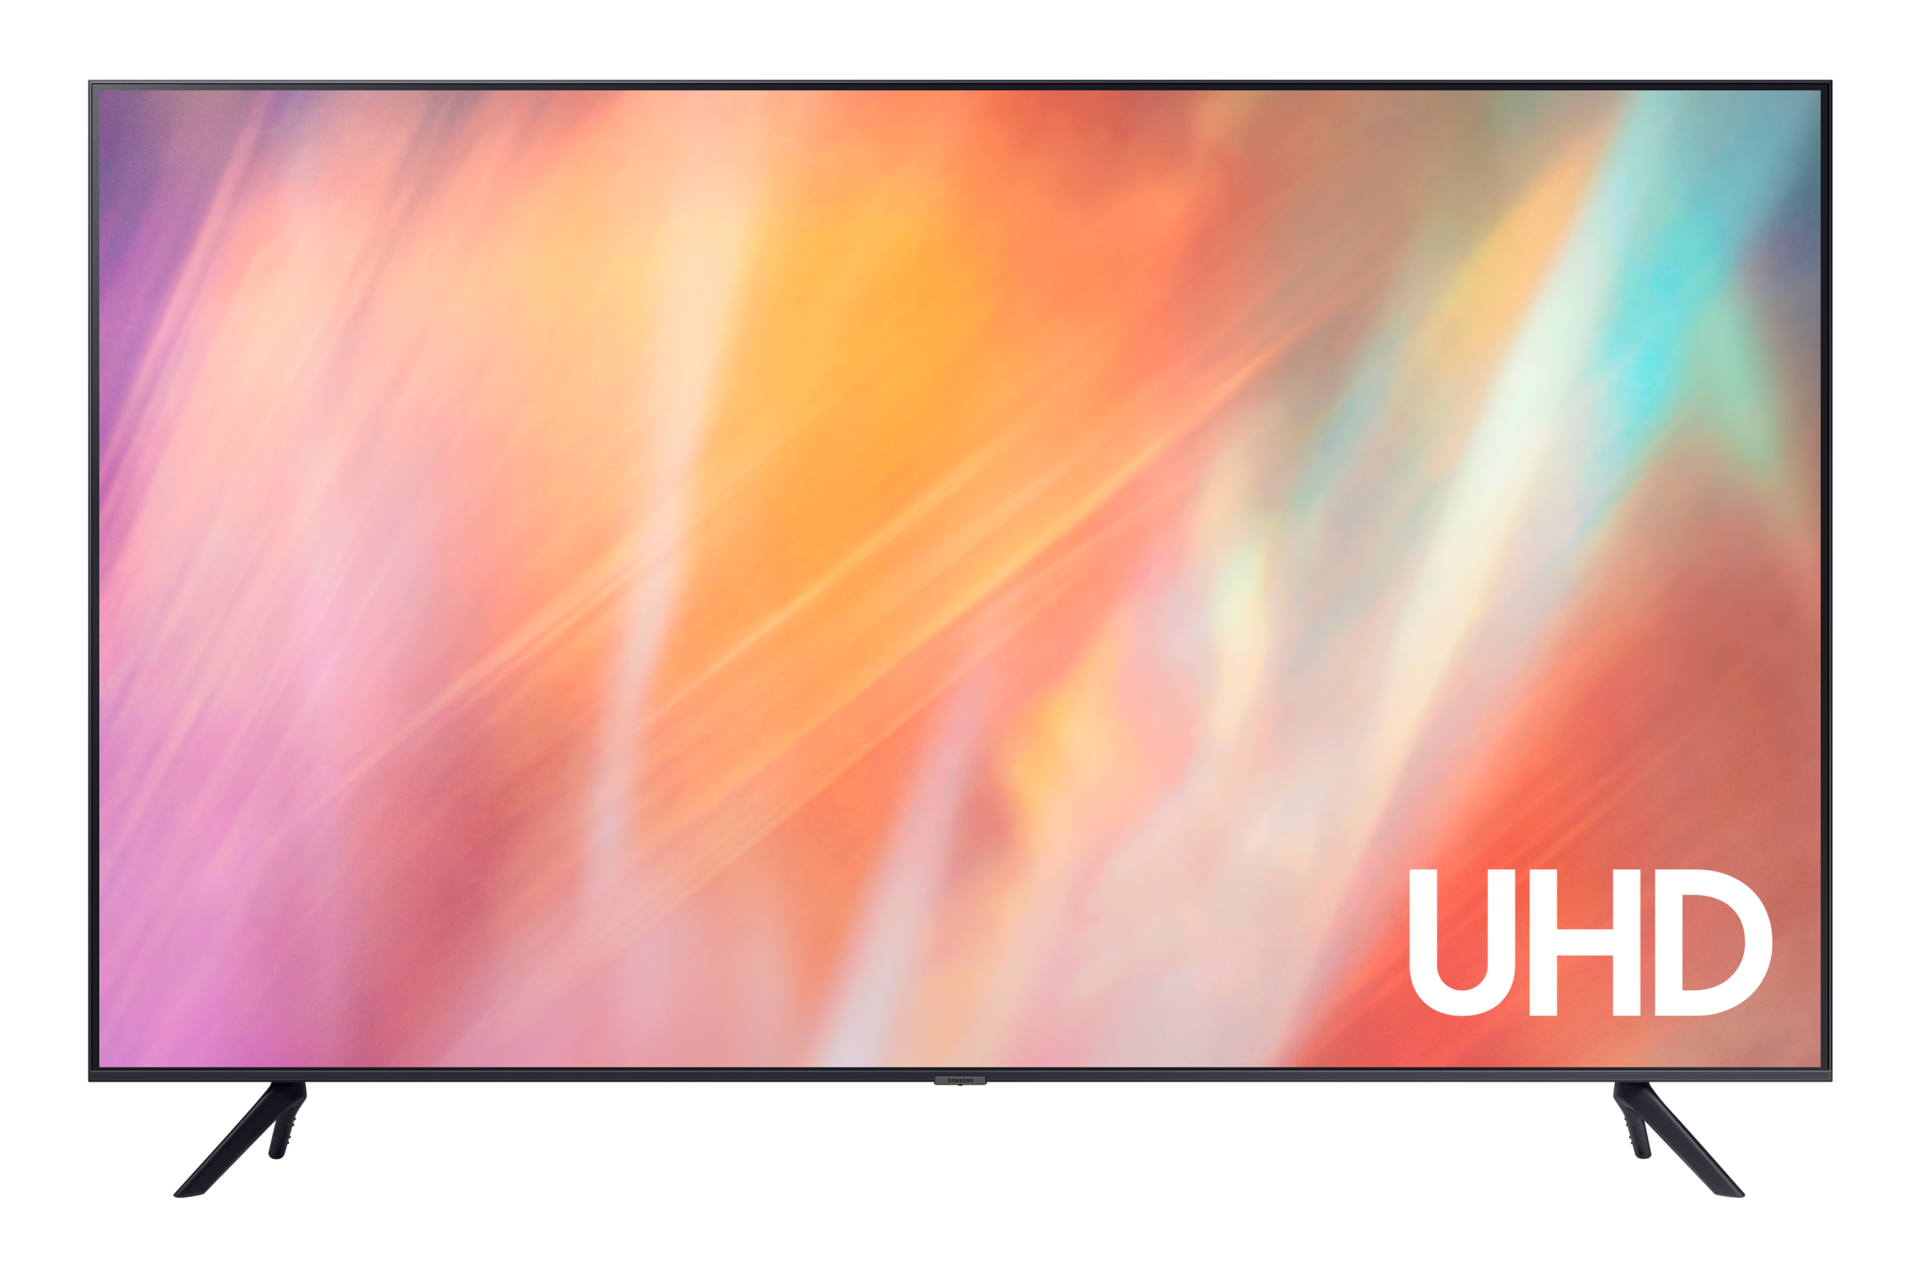 Samsung 4K UHD AU7000 is powered by Tizen with features such as screen mirroring, WiFi Direct, and SmartThings. Check out the price and buy now.